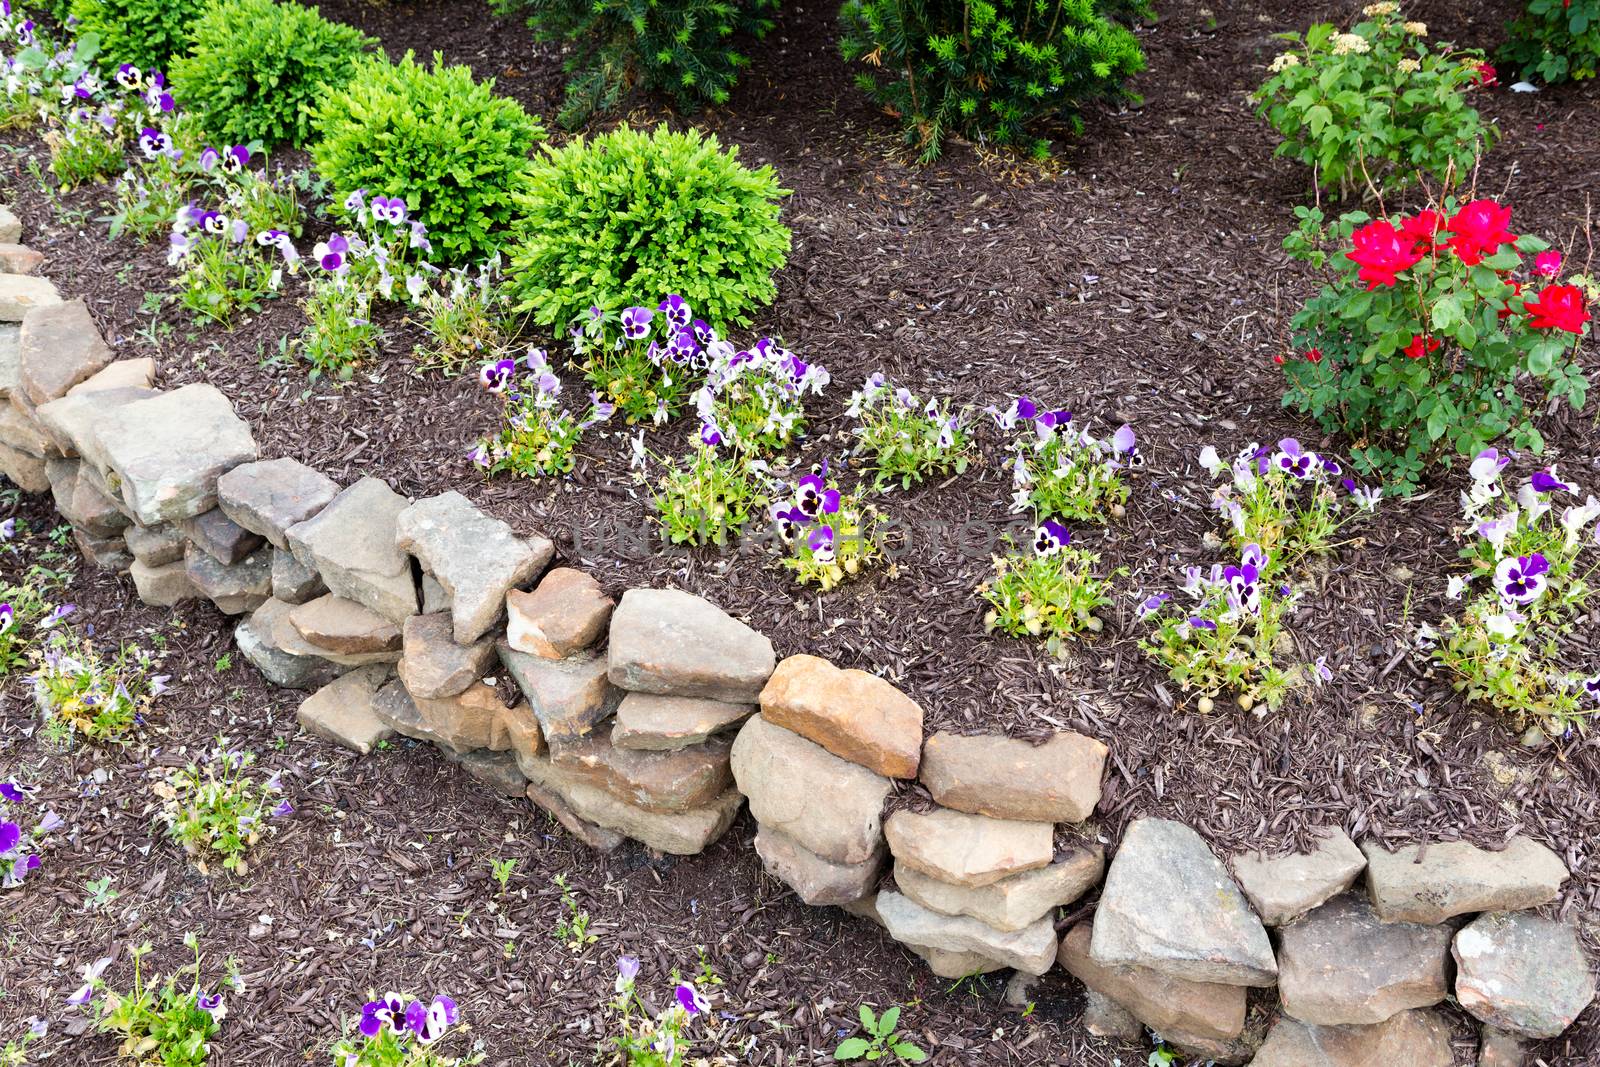 Natural rock retaining wall in a garden with rough rocks and stones arranged in a curve for a formal raised bed of flowering plants in a garden landscaping concept